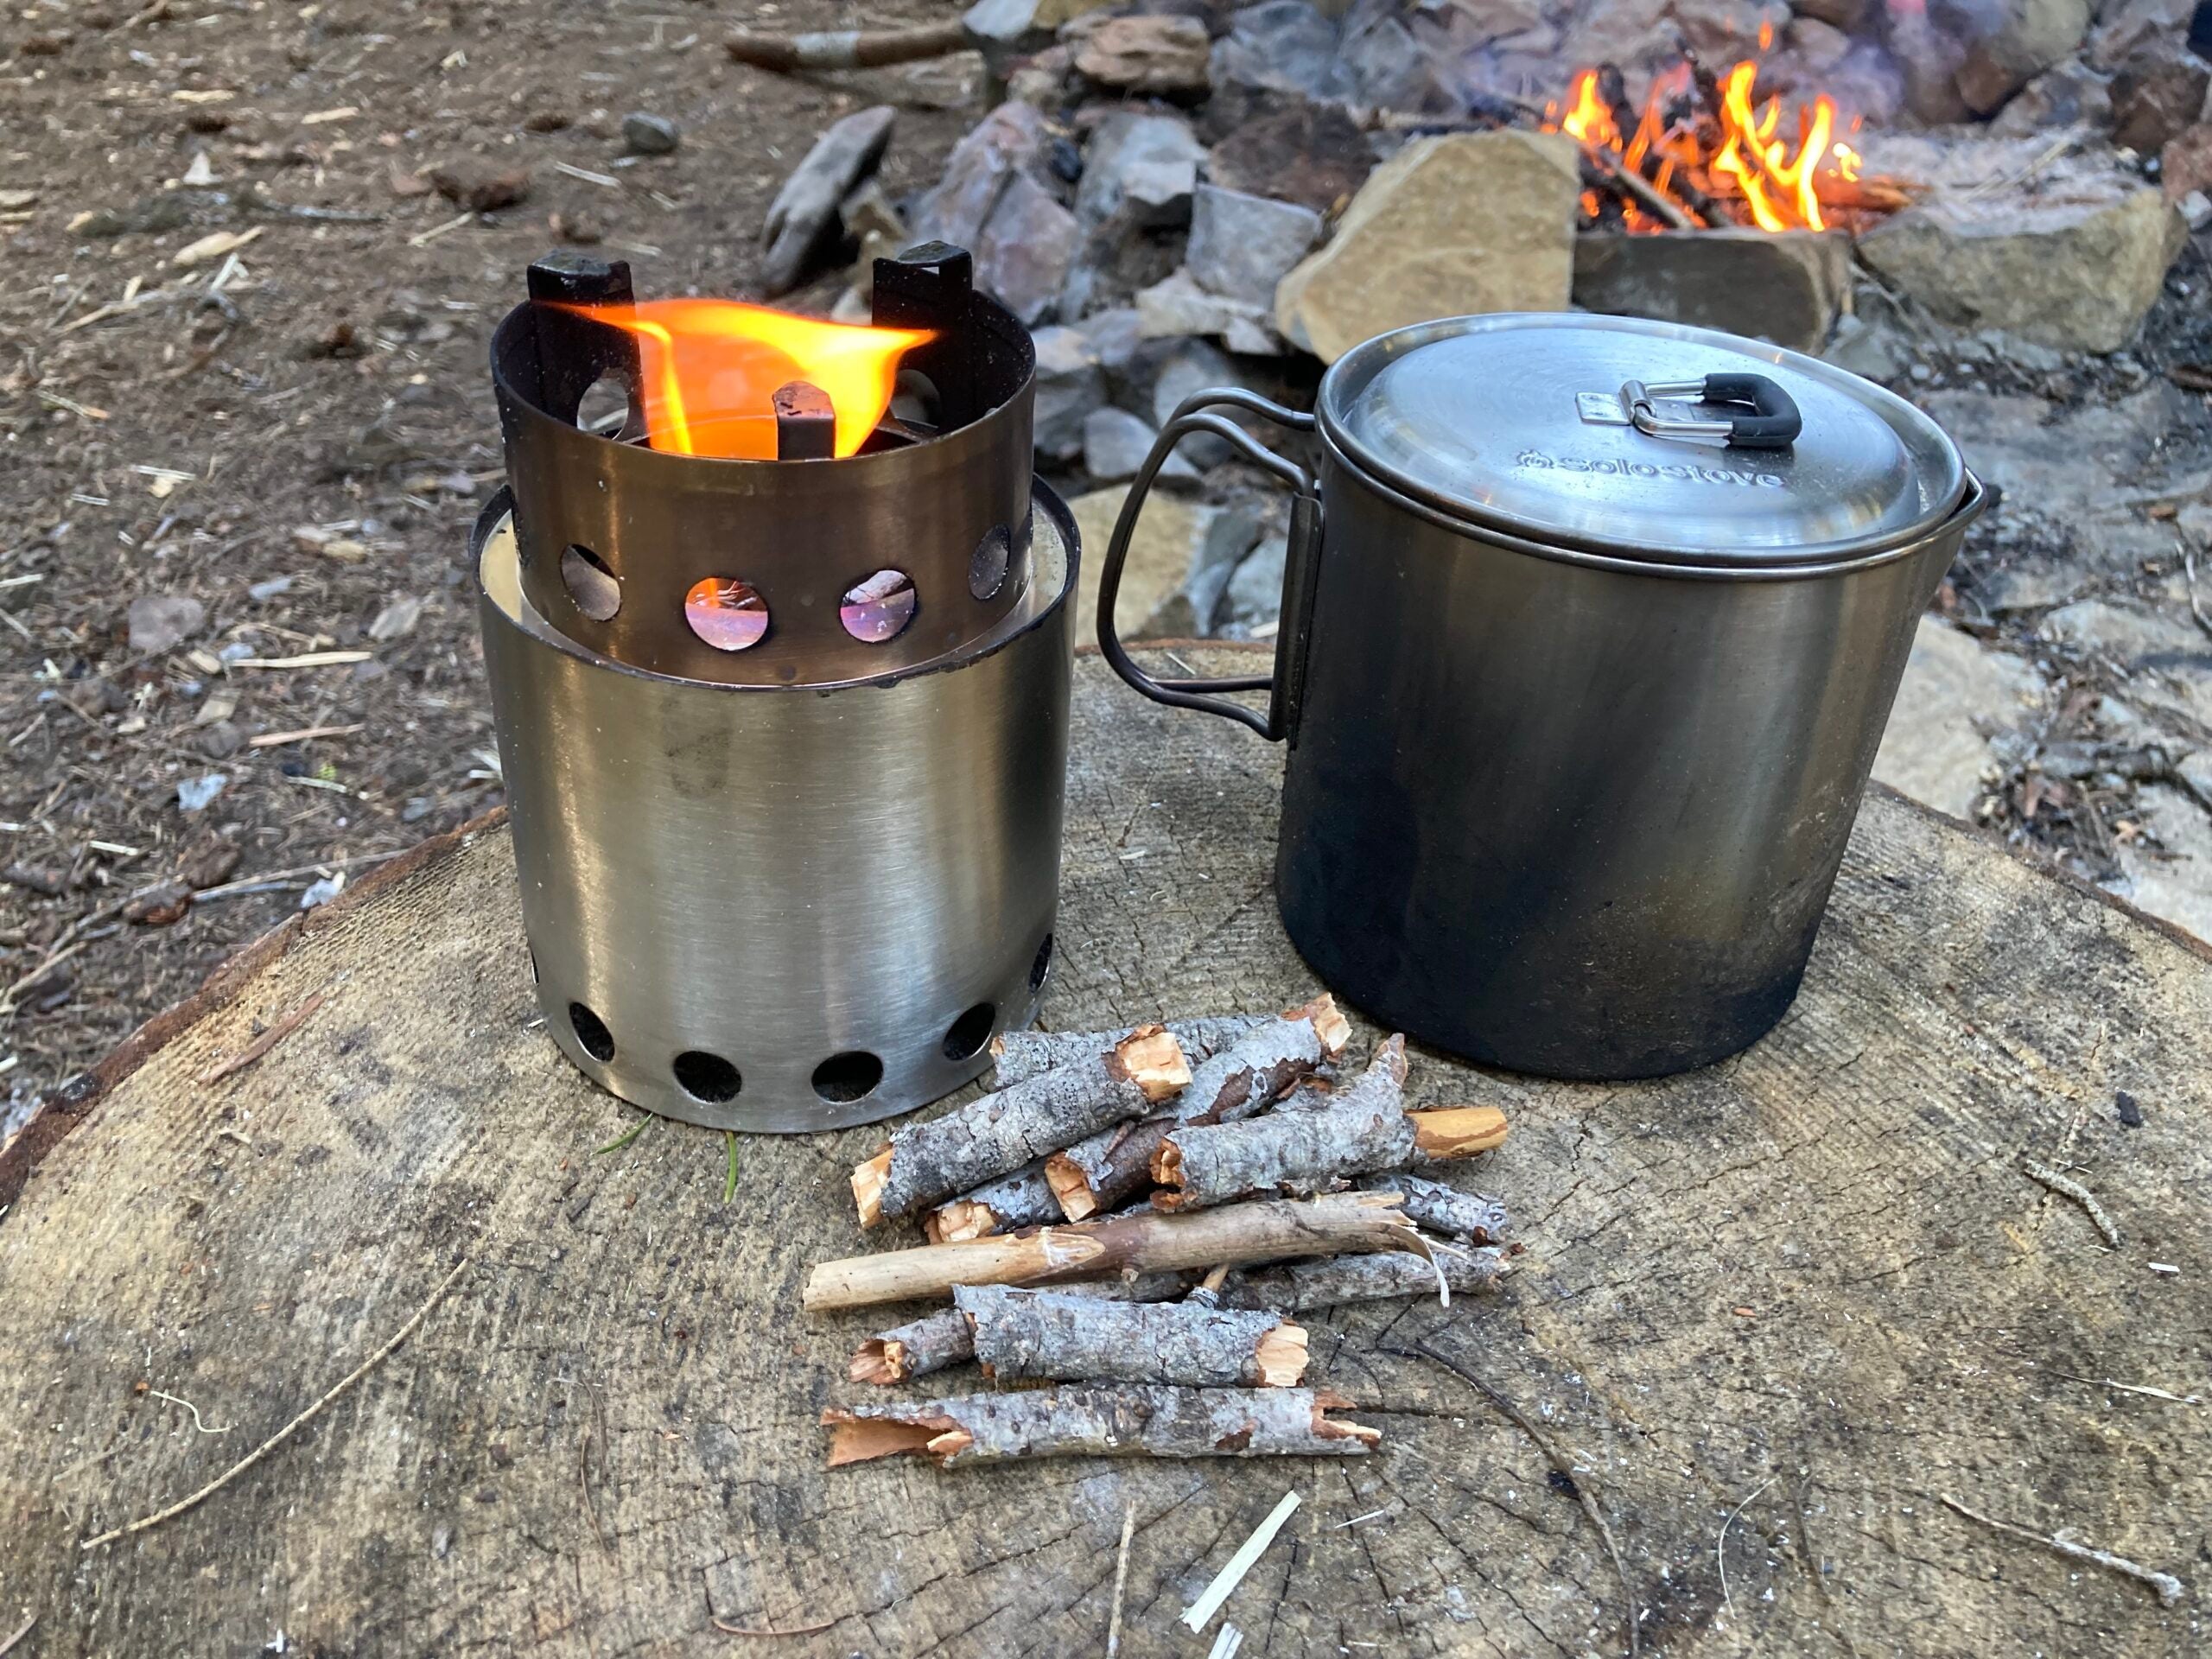 Solo Stove Lite Review: We Tested the Smokeless Camp Stove | Field